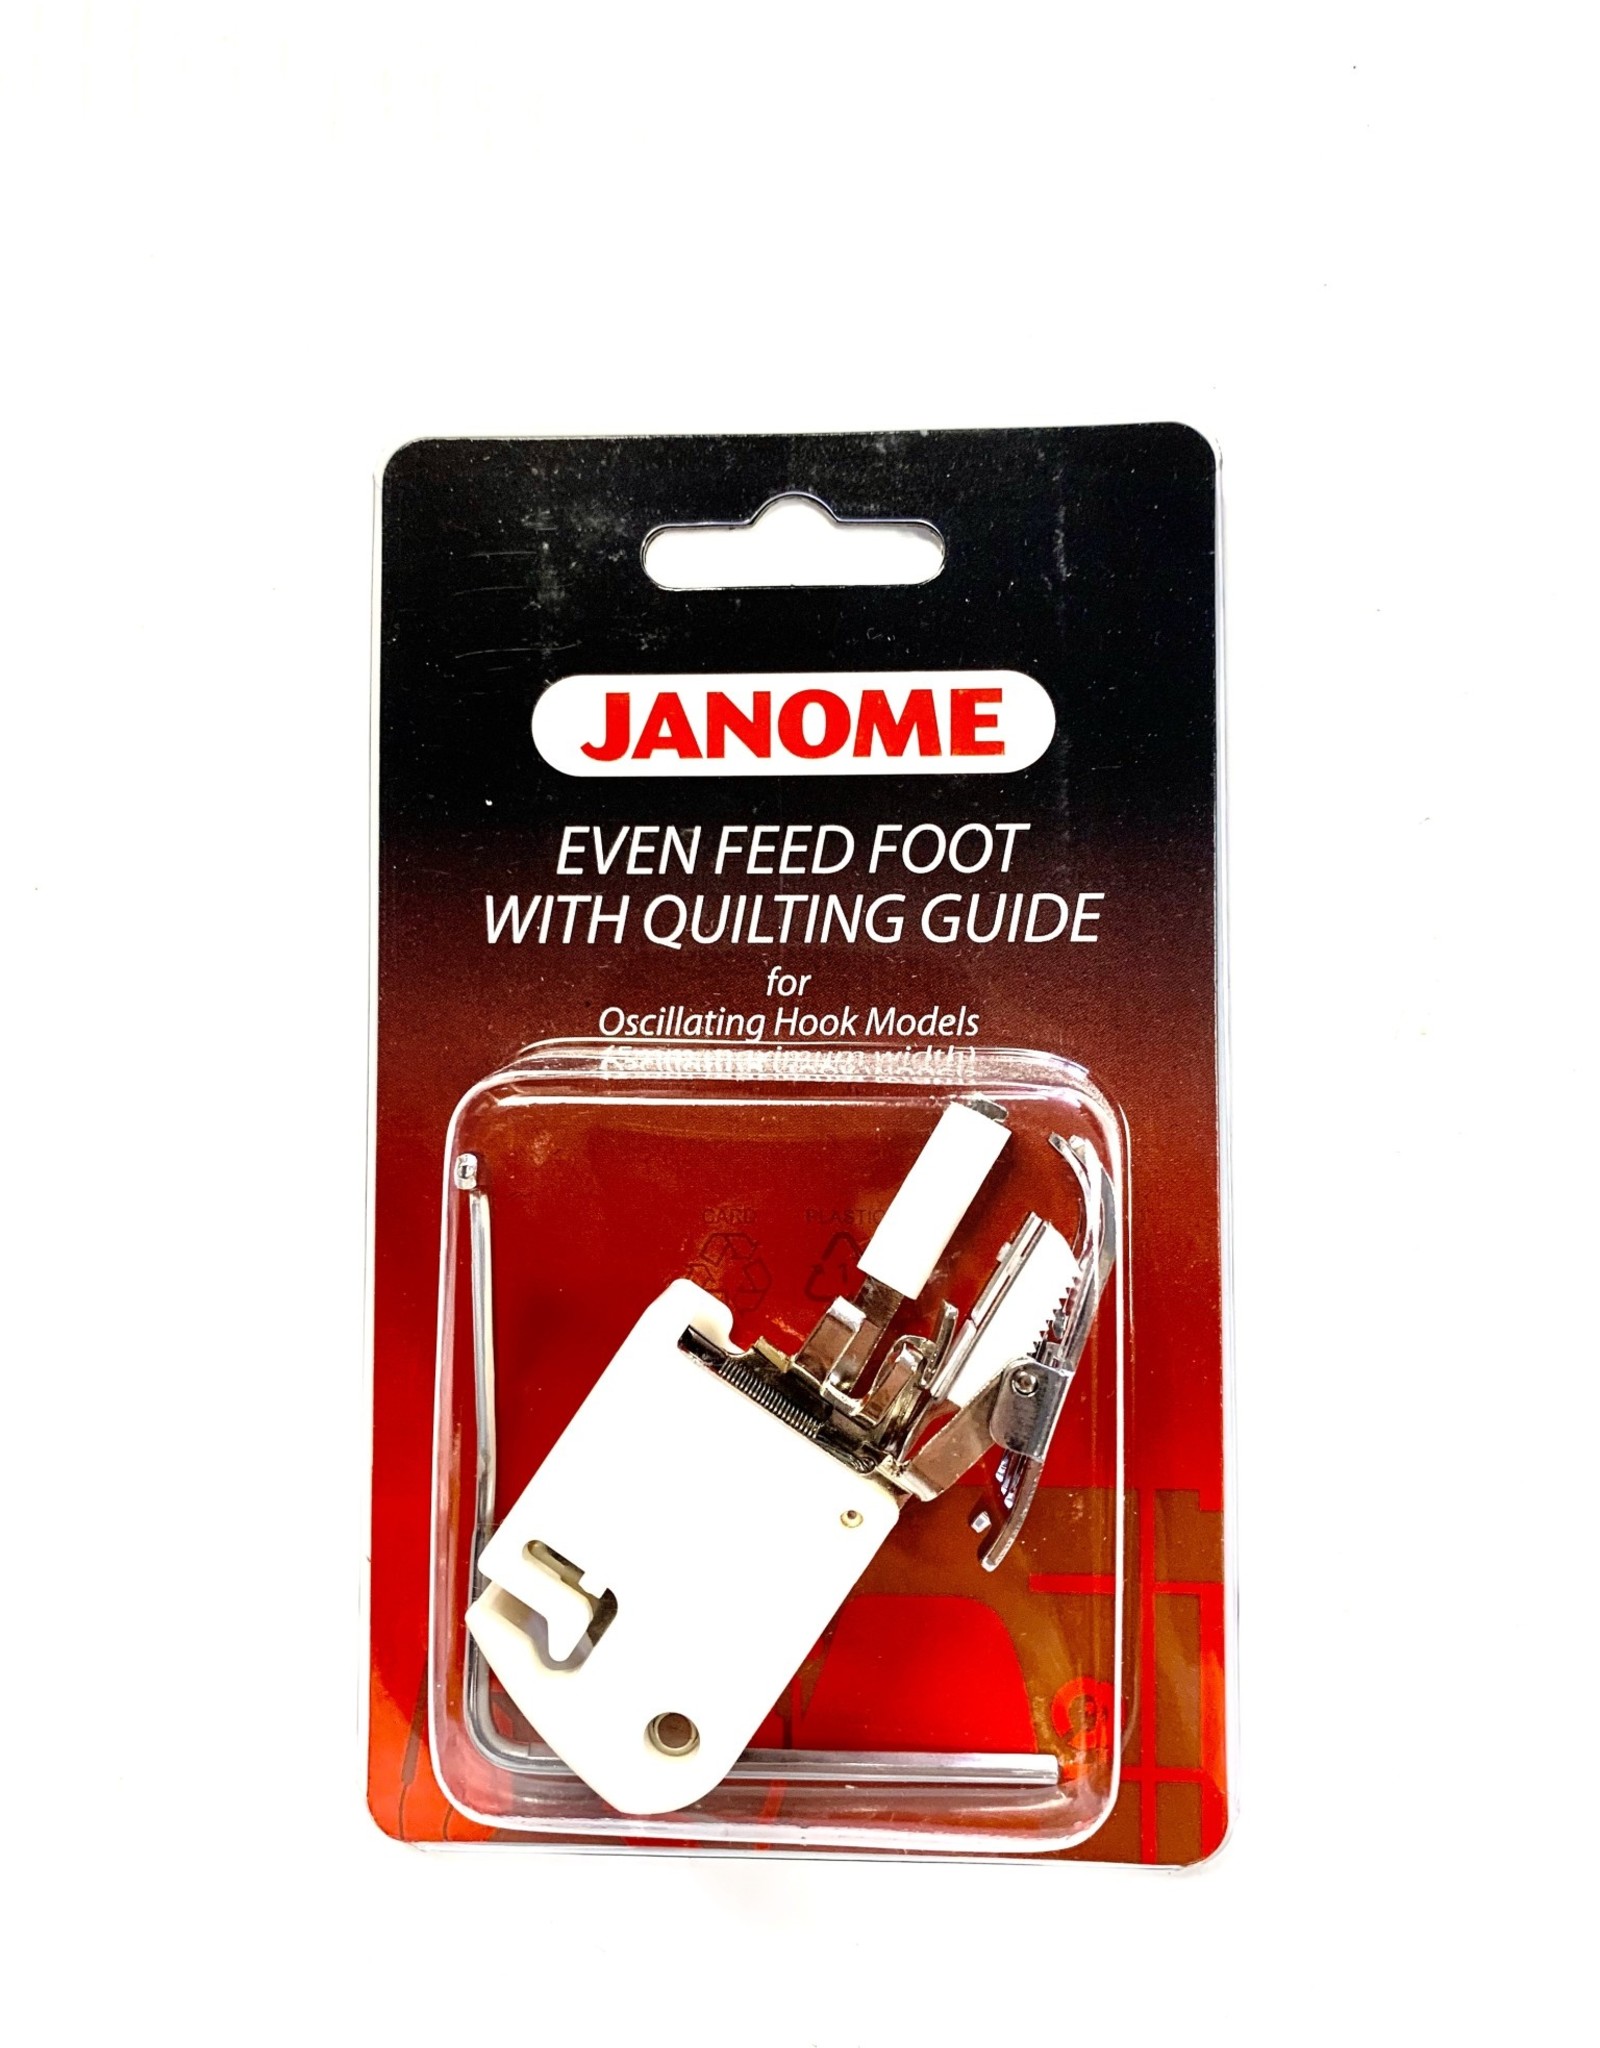 Janome Even Feed Foot With Quilting Guide (Oscillating)- 200310002